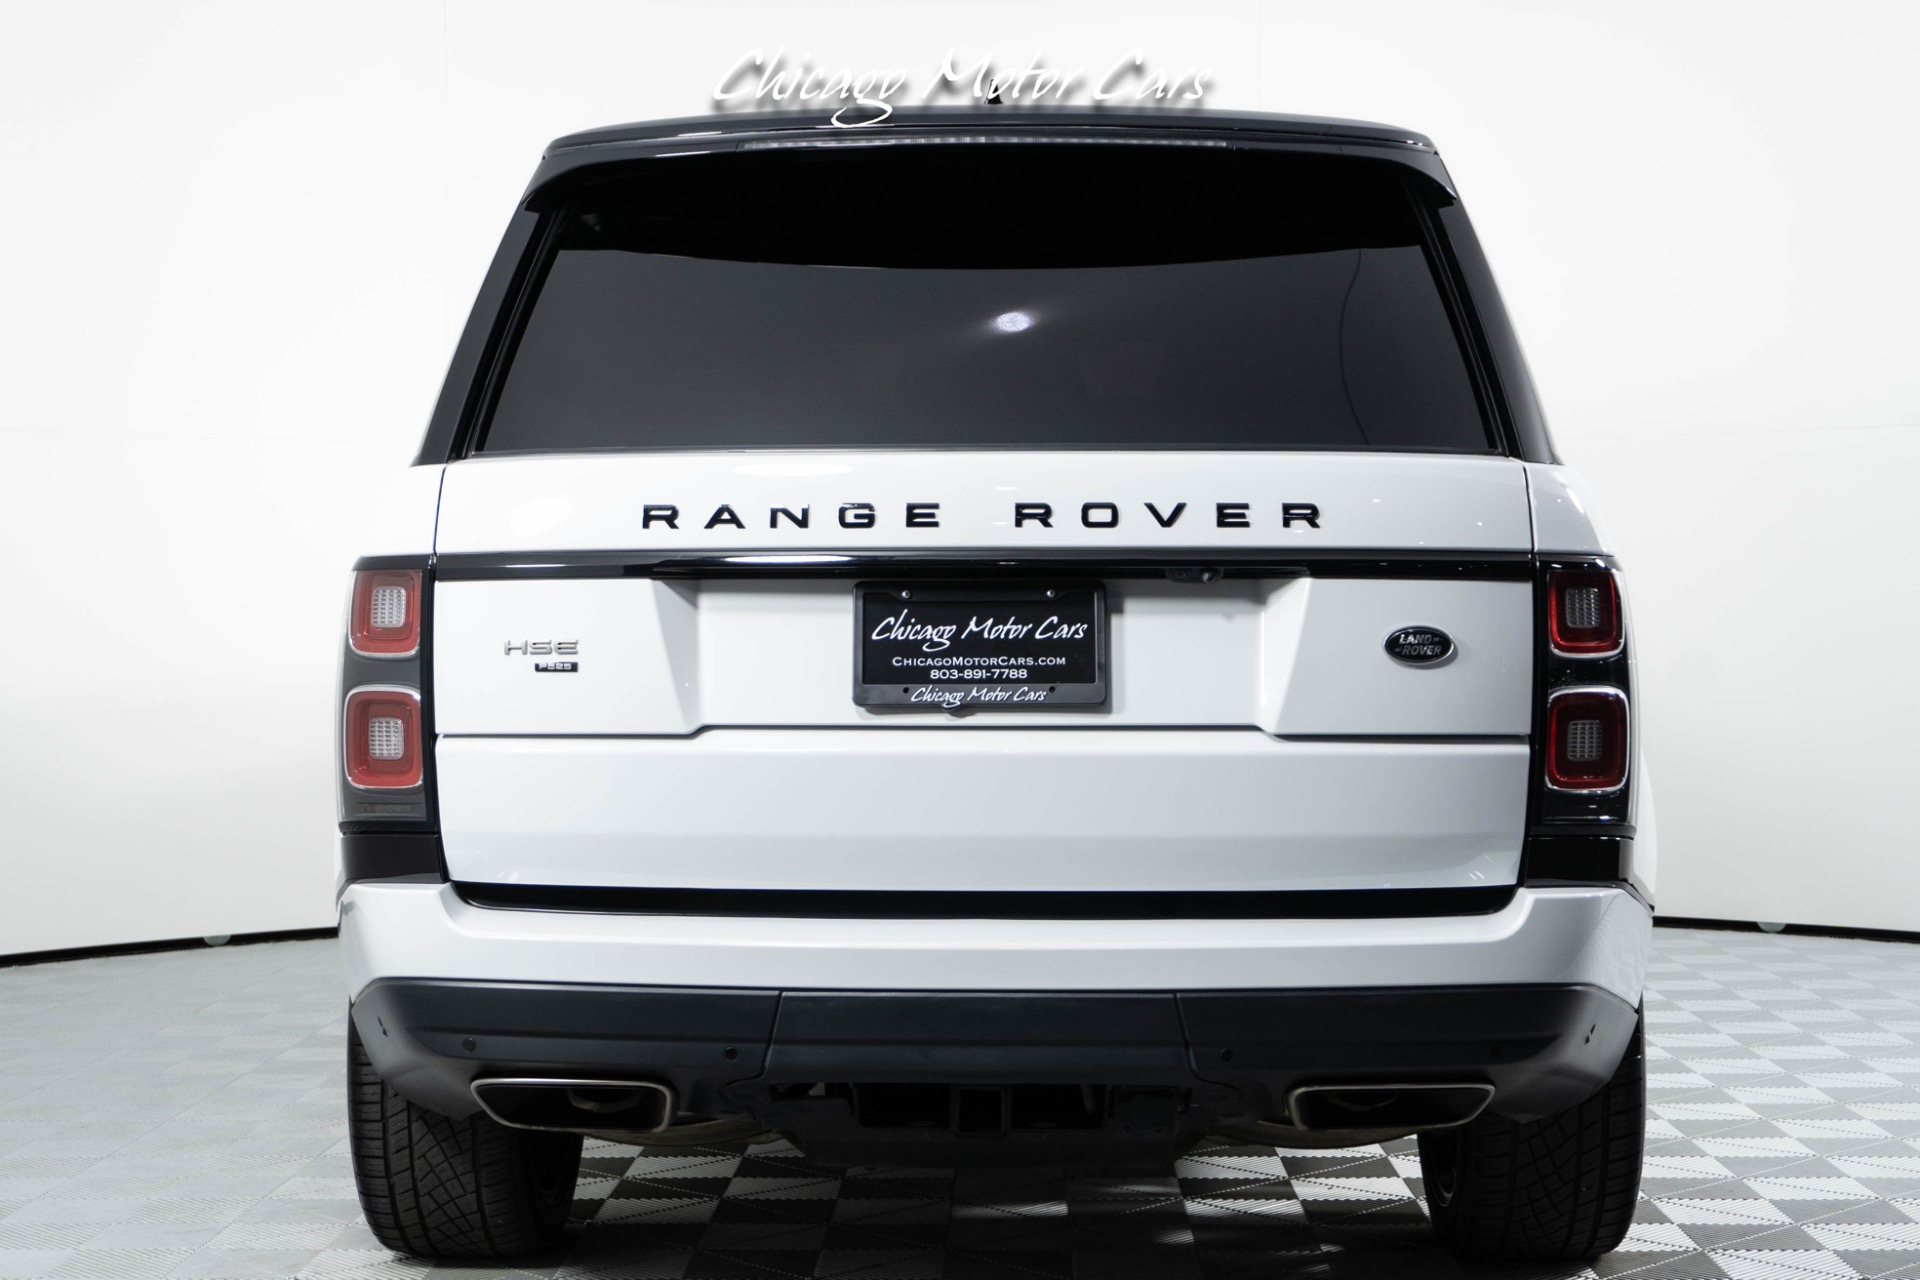 Used-2020-Land-Rover-Range-Rover-Supercharged-LWB-Vision-Assist-Black-Exterior-Pack-Loaded